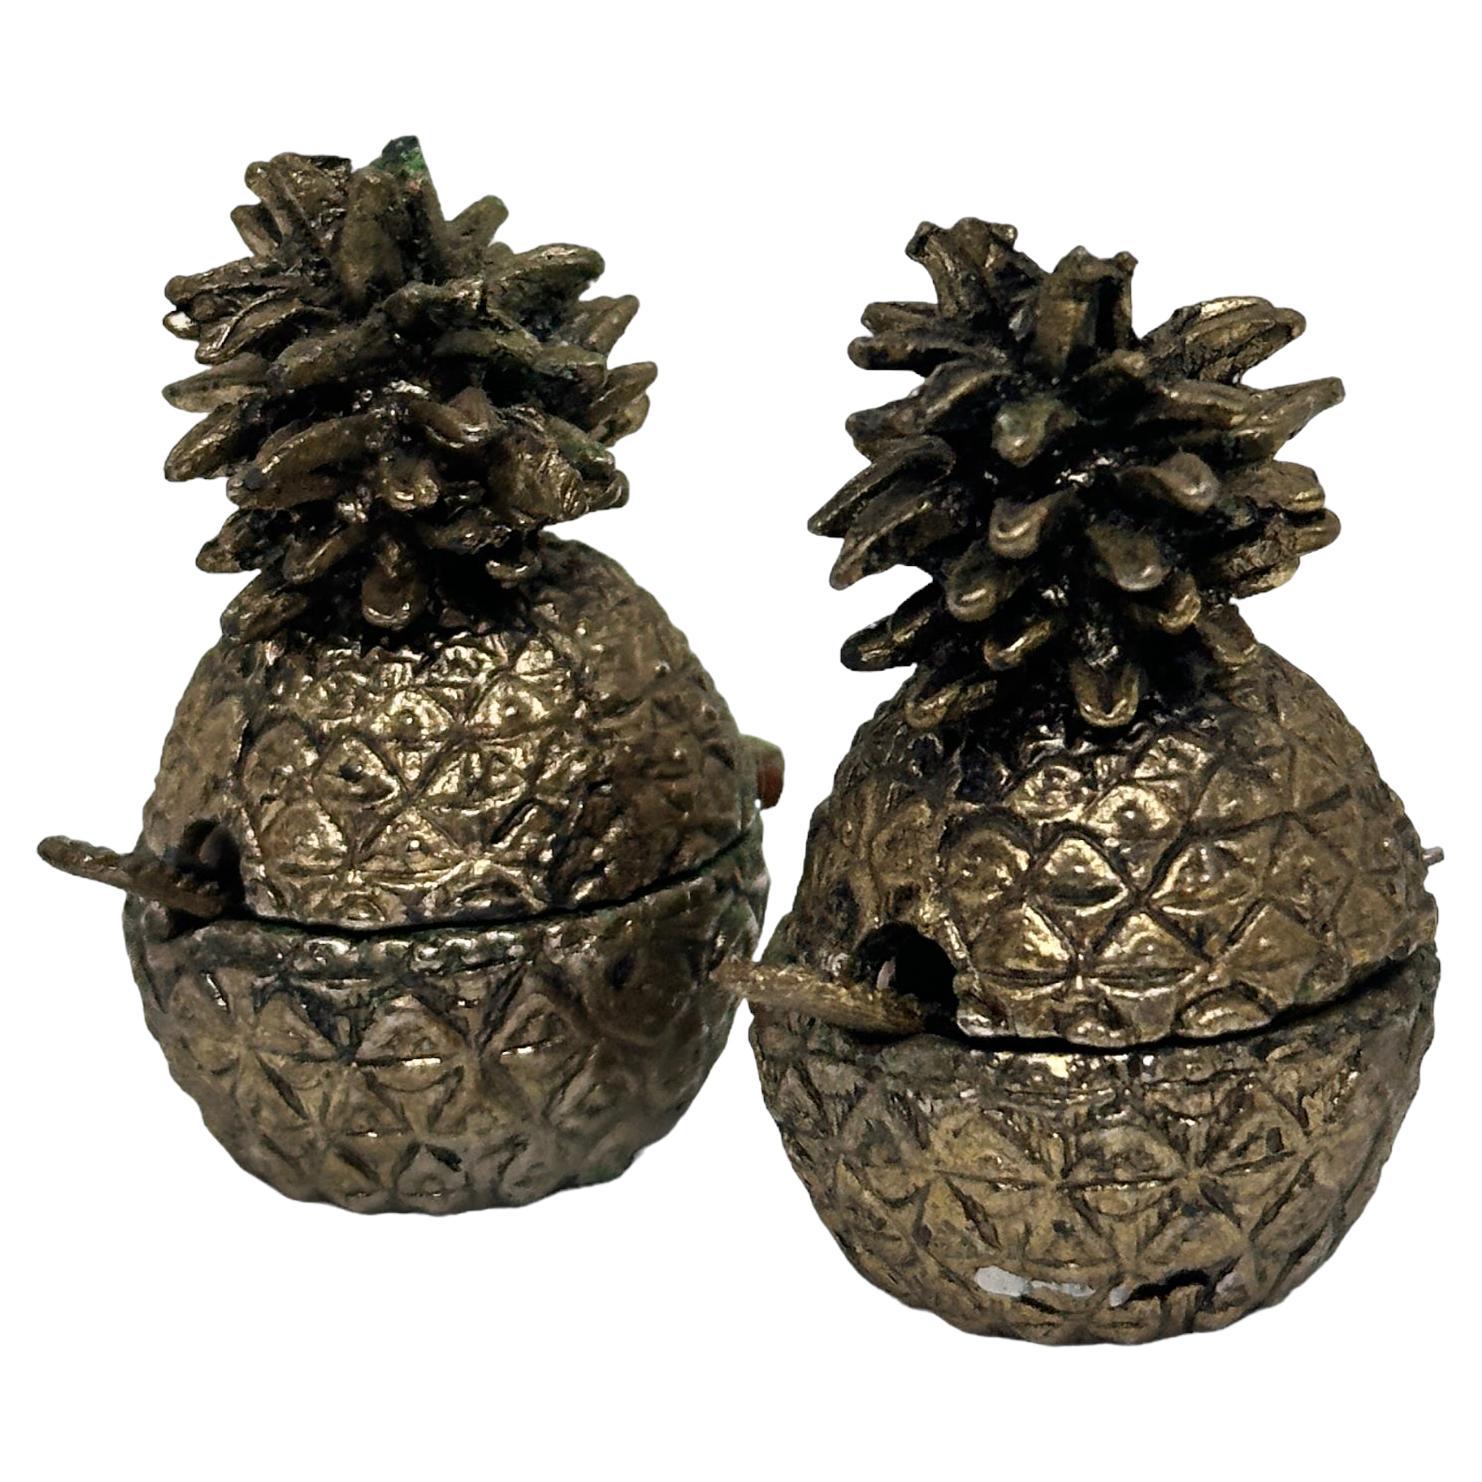 Pair of Vintage Sweetener Pill Boxes Pineapple Design, Italy 1960s